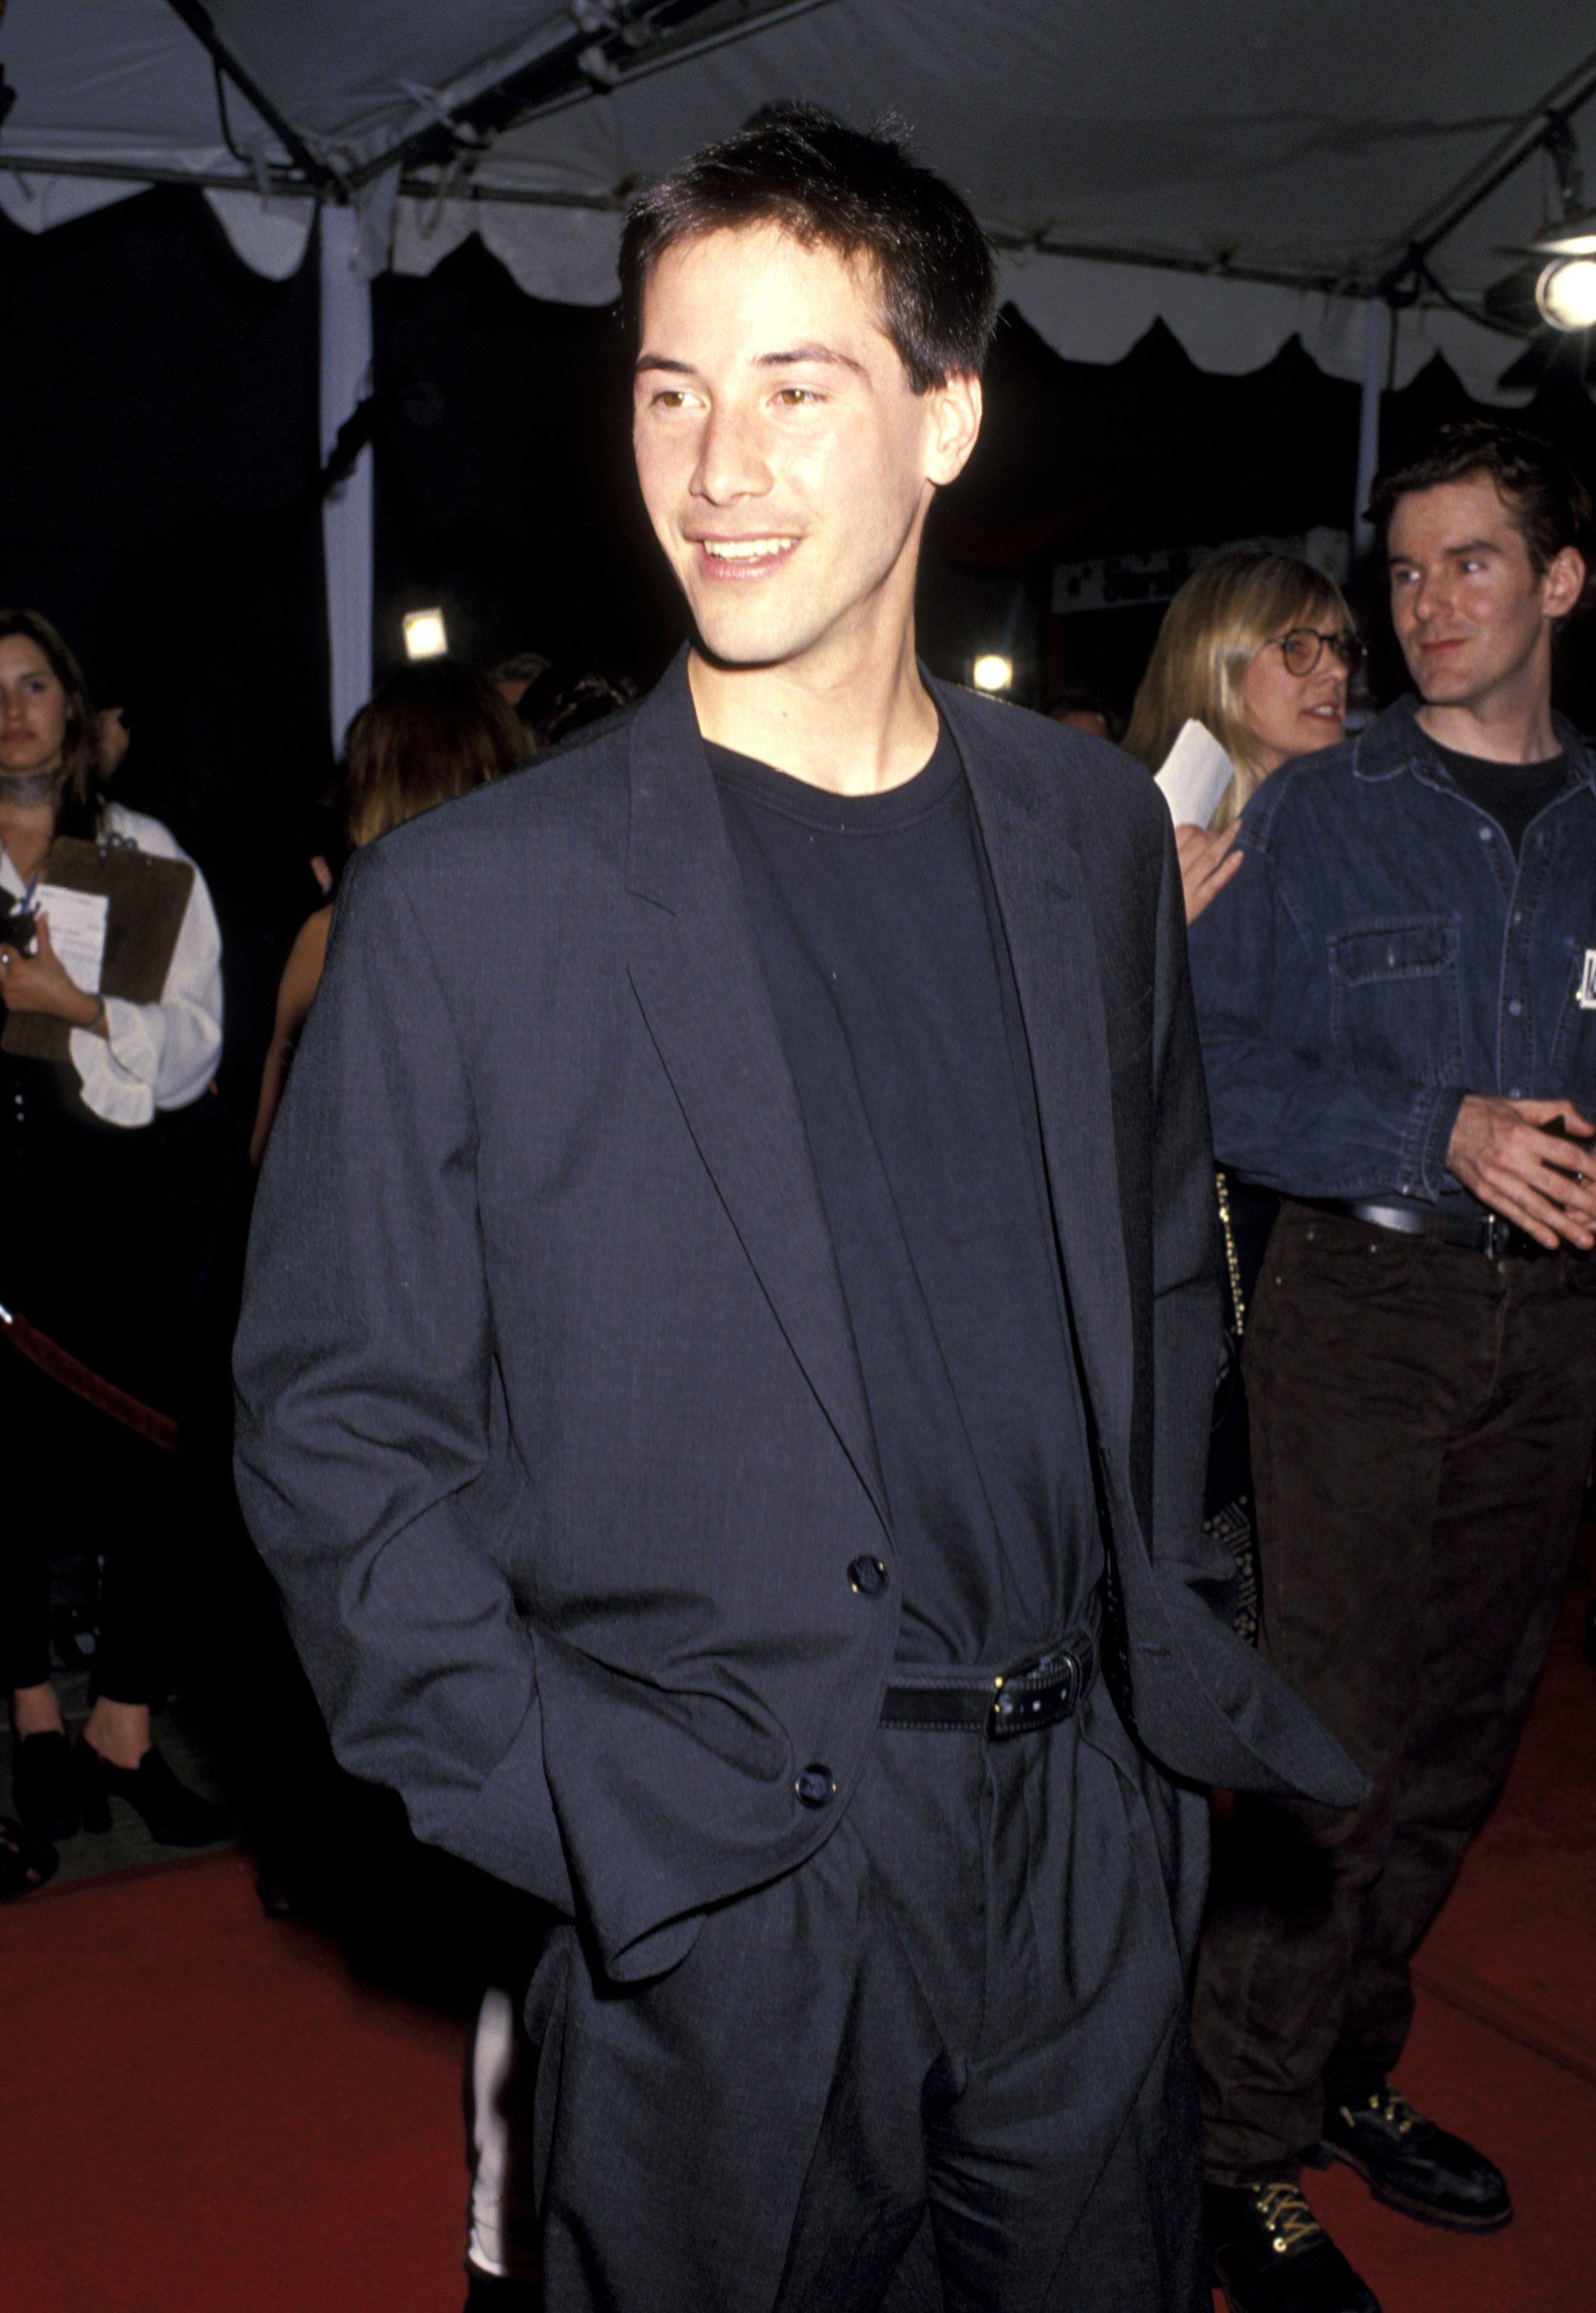 Keanu Reeves attend the "Speed" Los Angeles Premiere at Mann's Chinese Theater in 1994 in Hollywood, California. | Source: Getty Images